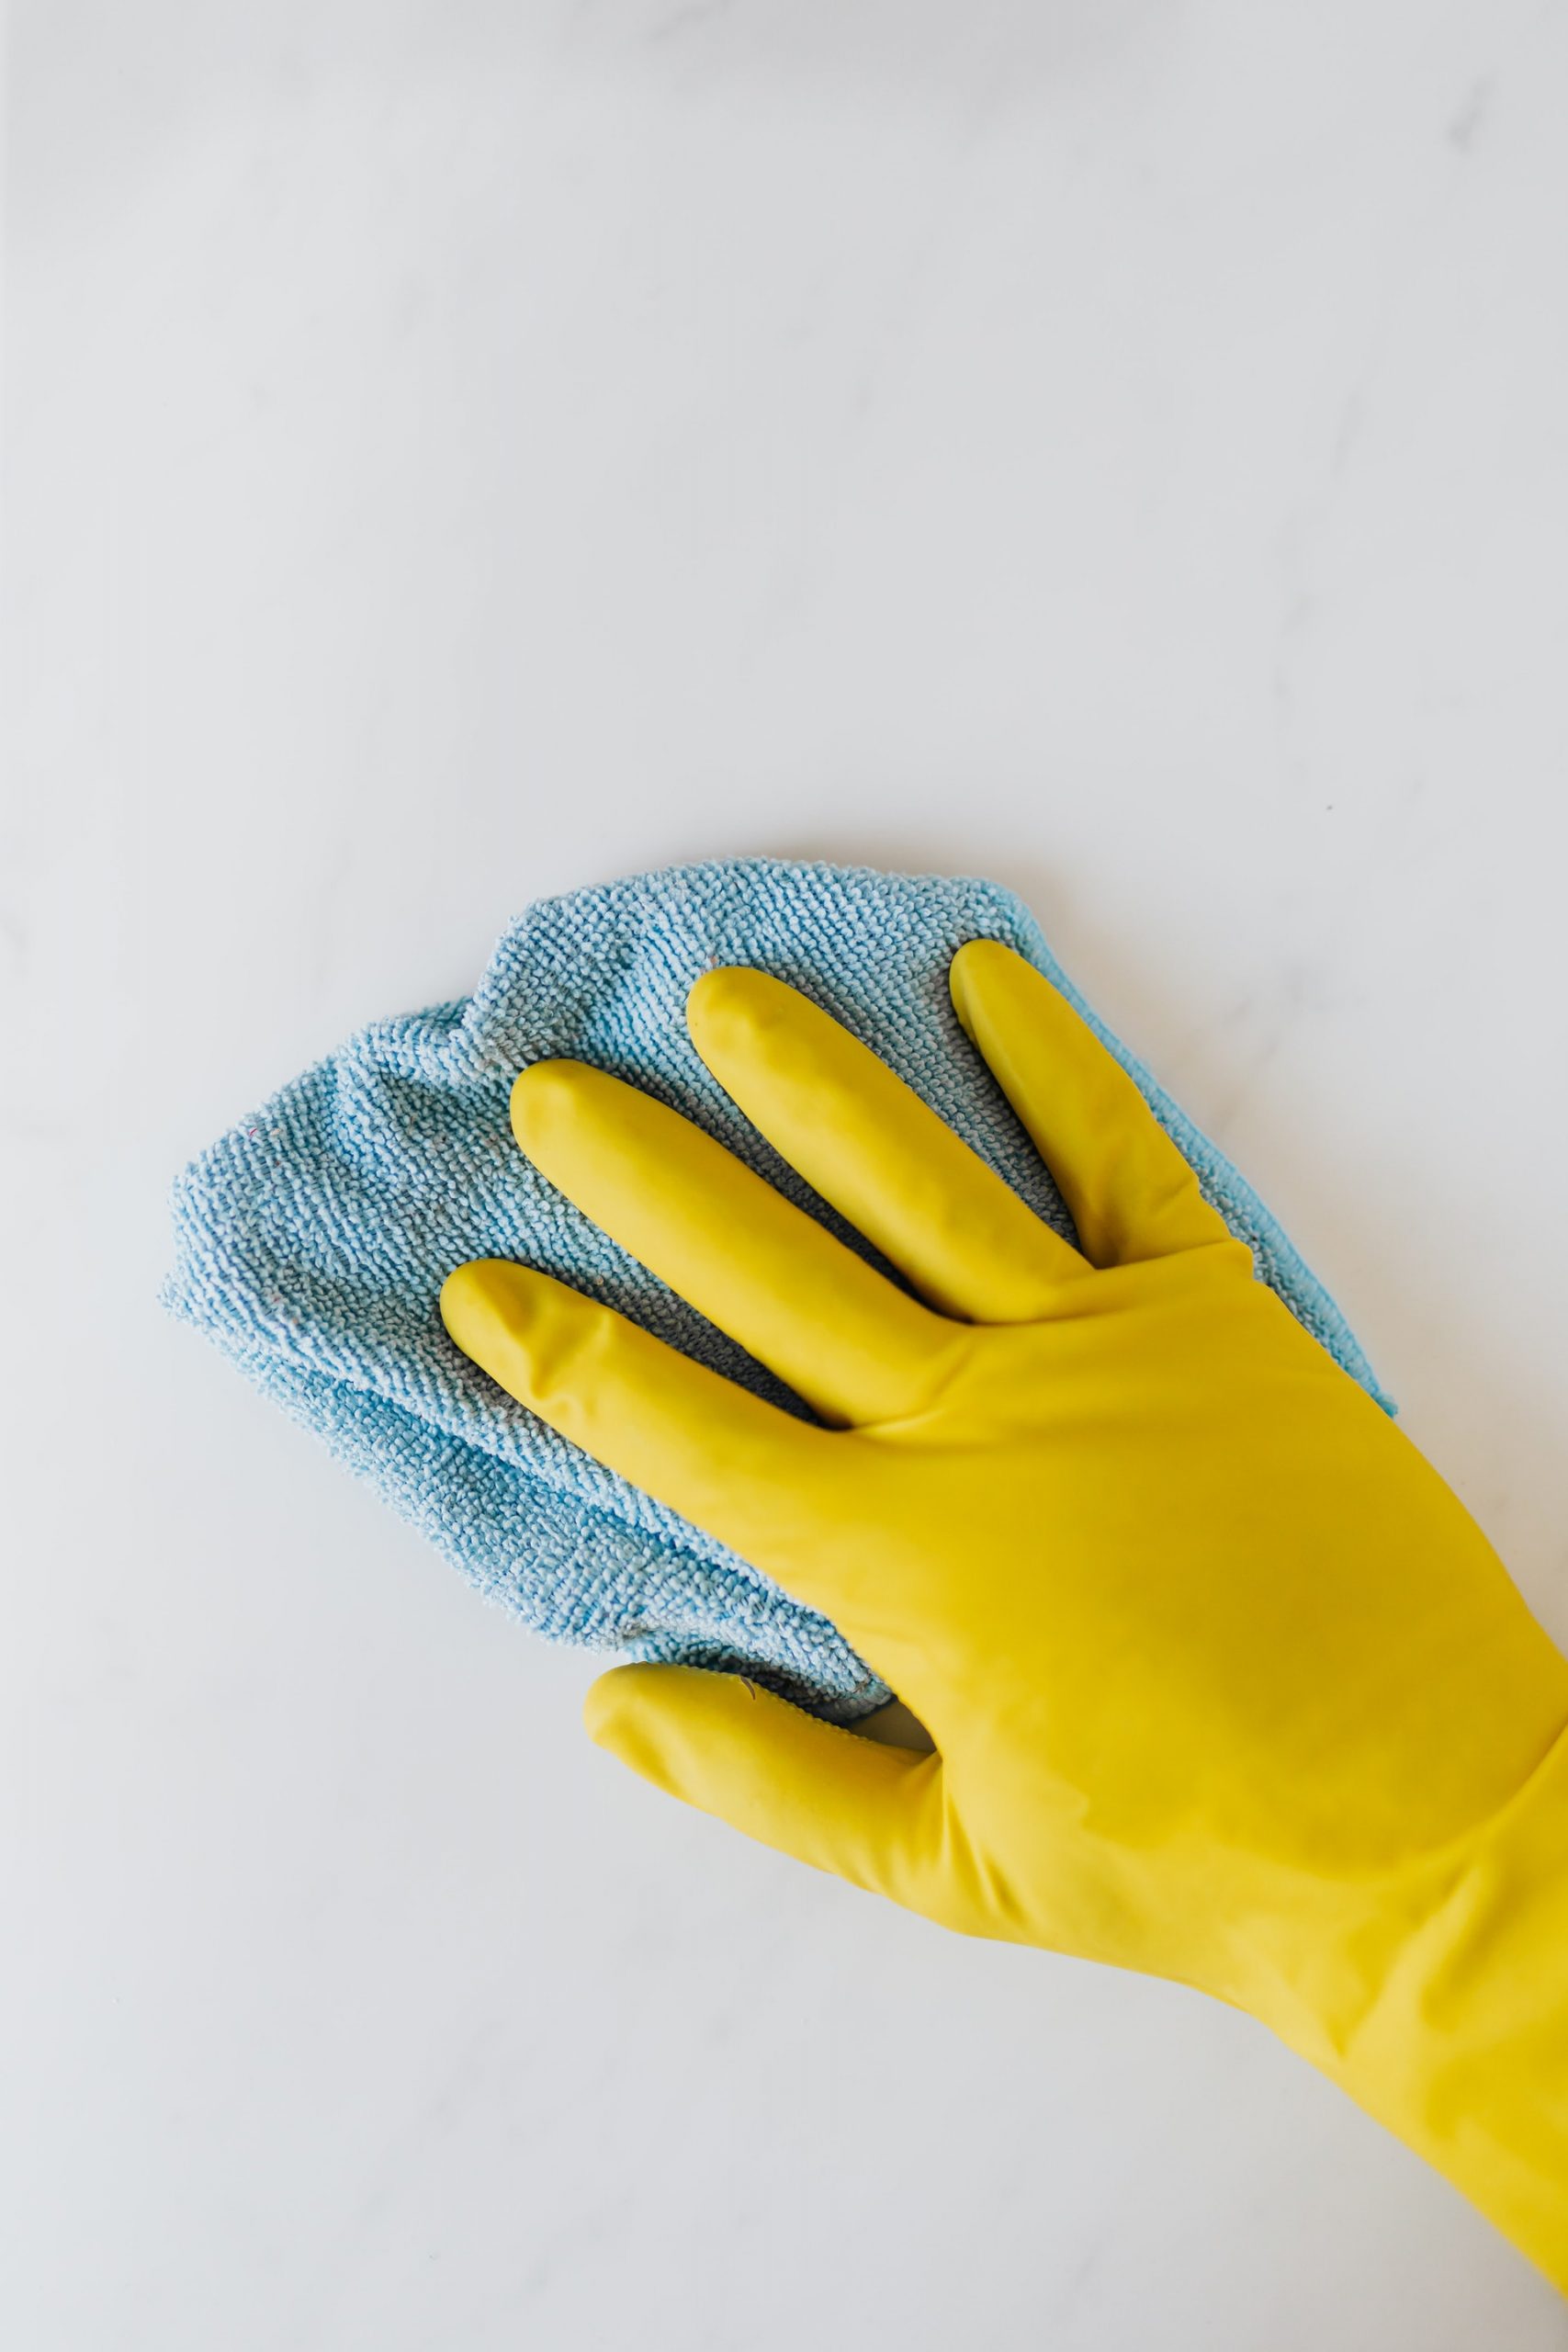 12 Reasons Why Every Company Should Hire a Cleaning Service